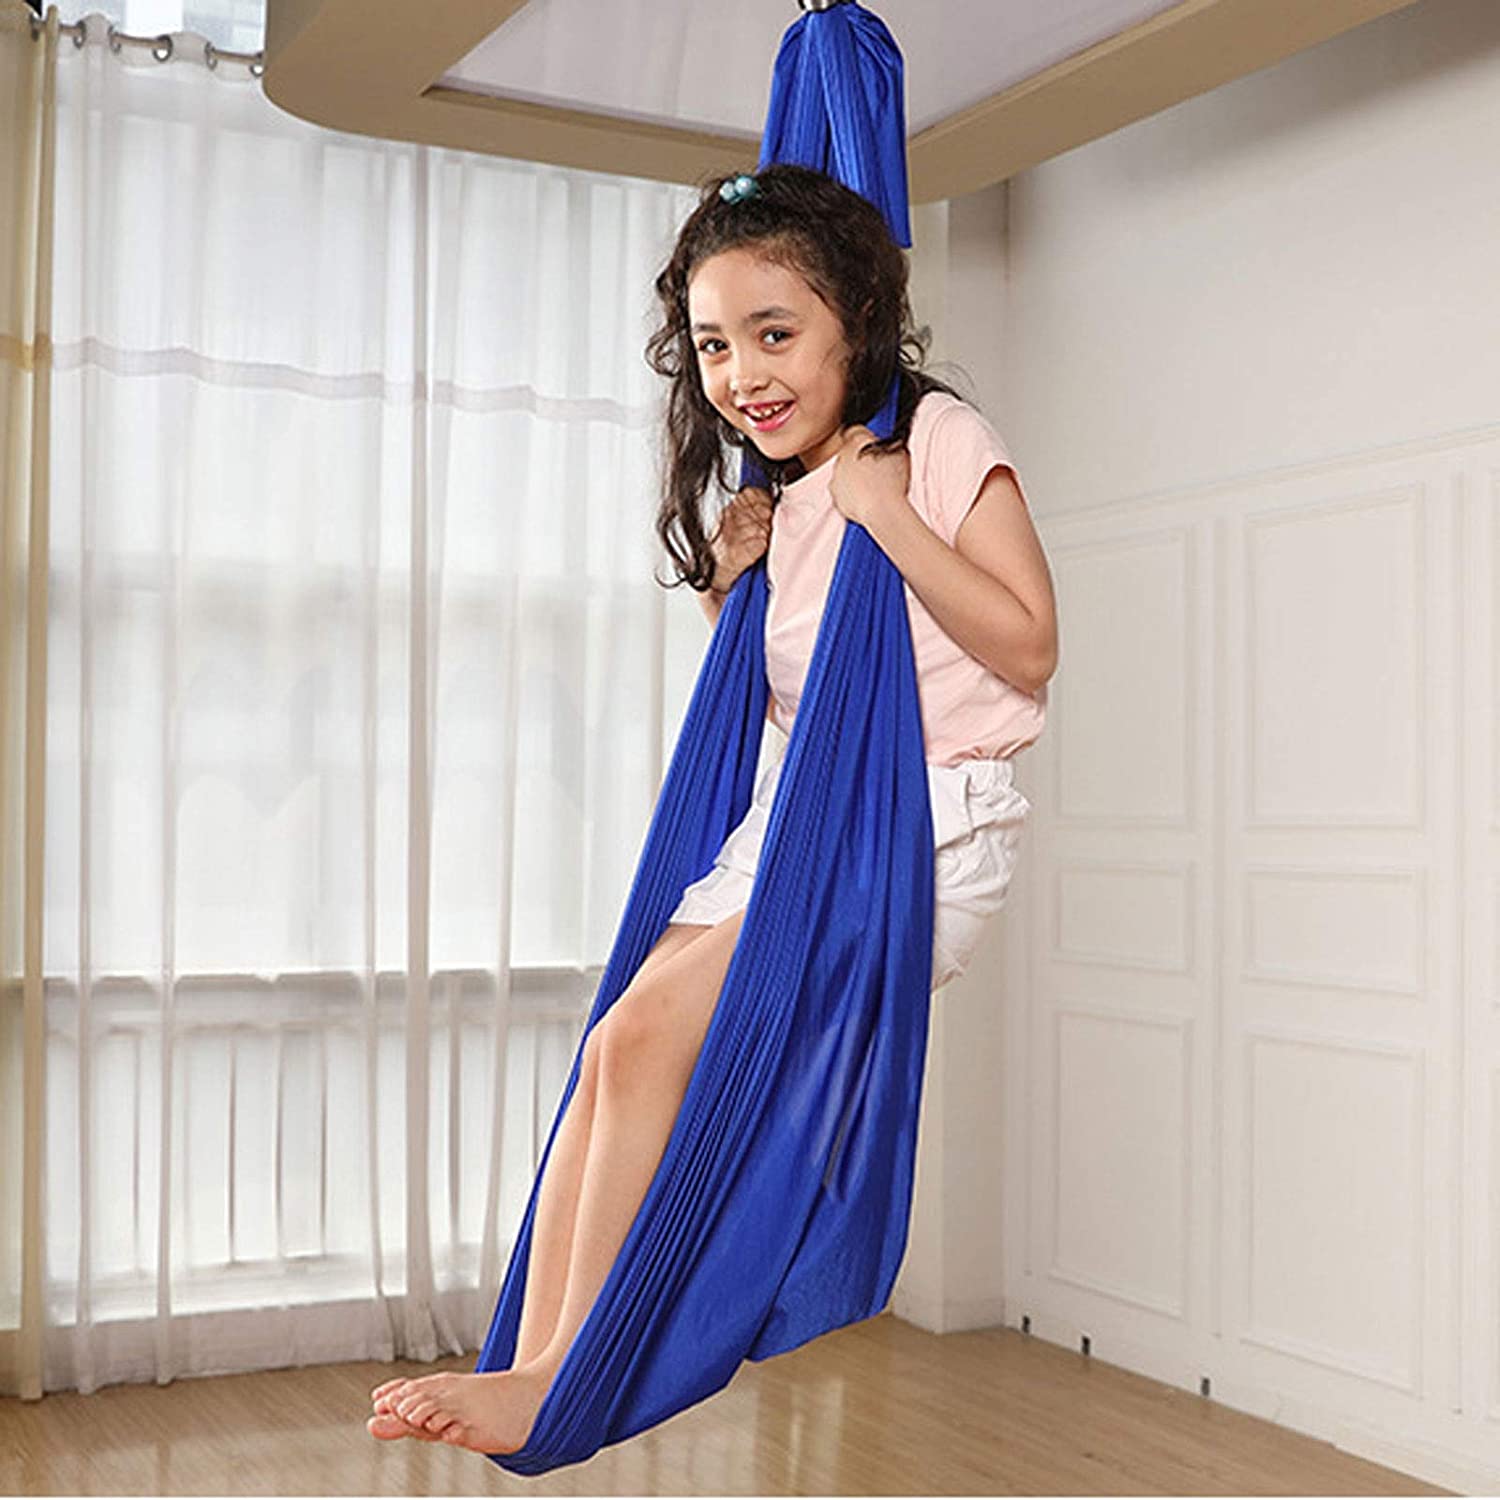 ZCYBHD Indoor Adult Therapy Swing Sensory Swing for Adults with  Load-Bearing 200kg Sensory Swing Adjustable Hammock for Children to Play ＆  Calm (Colo テーブル、チェア、ハンモック